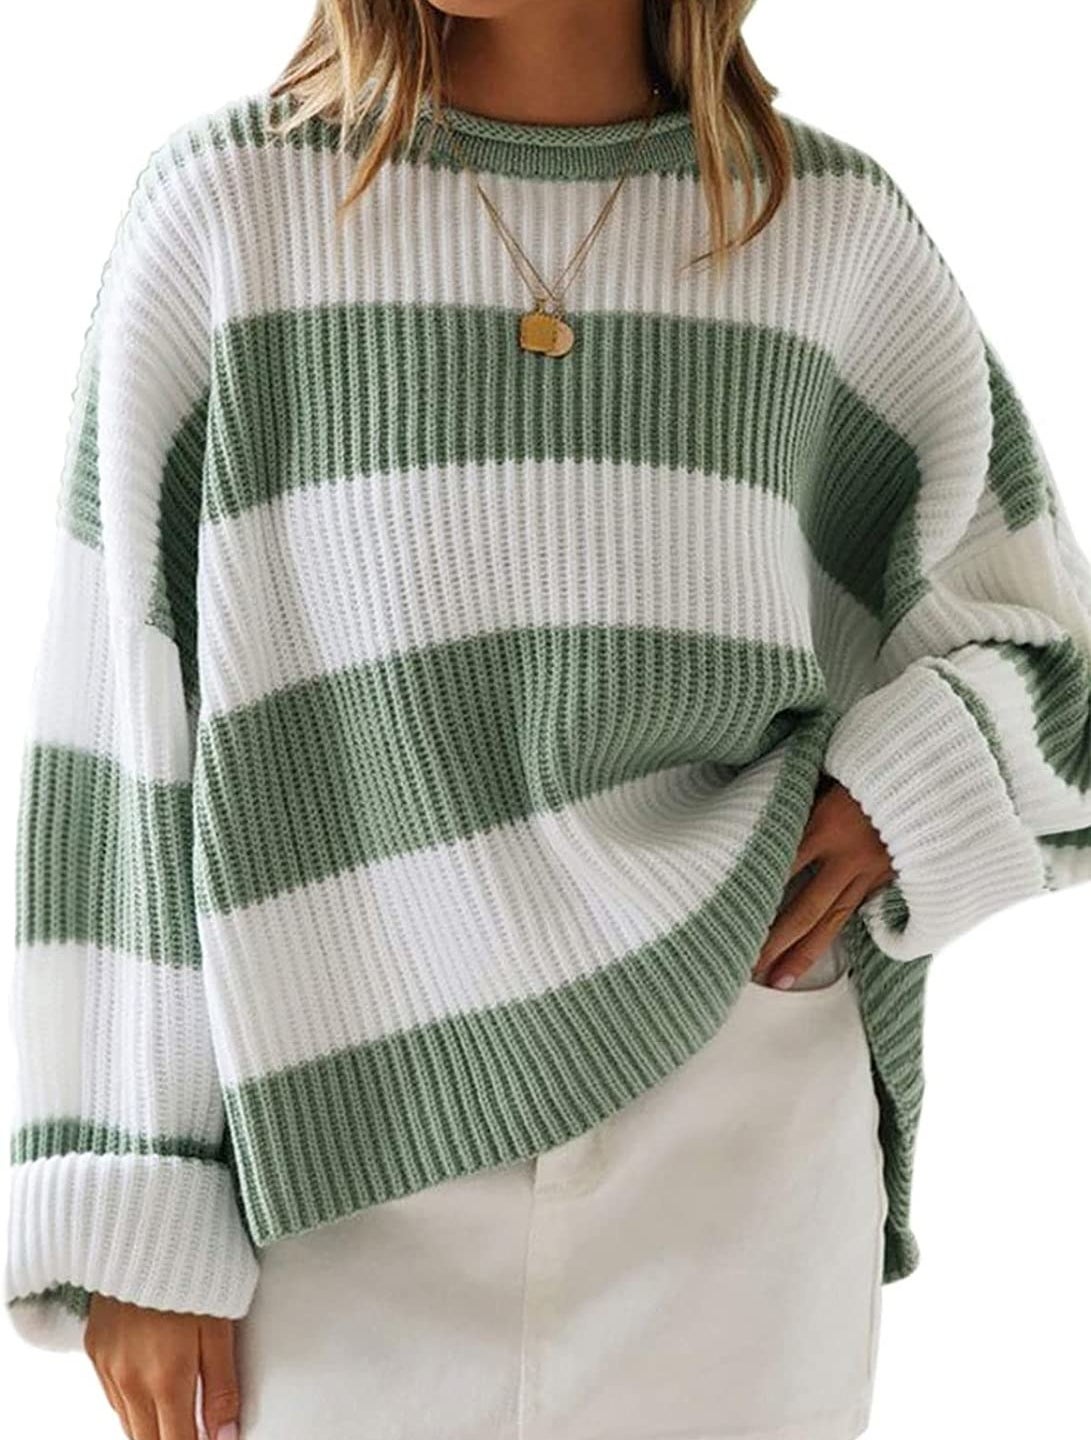 green and white striped sweater